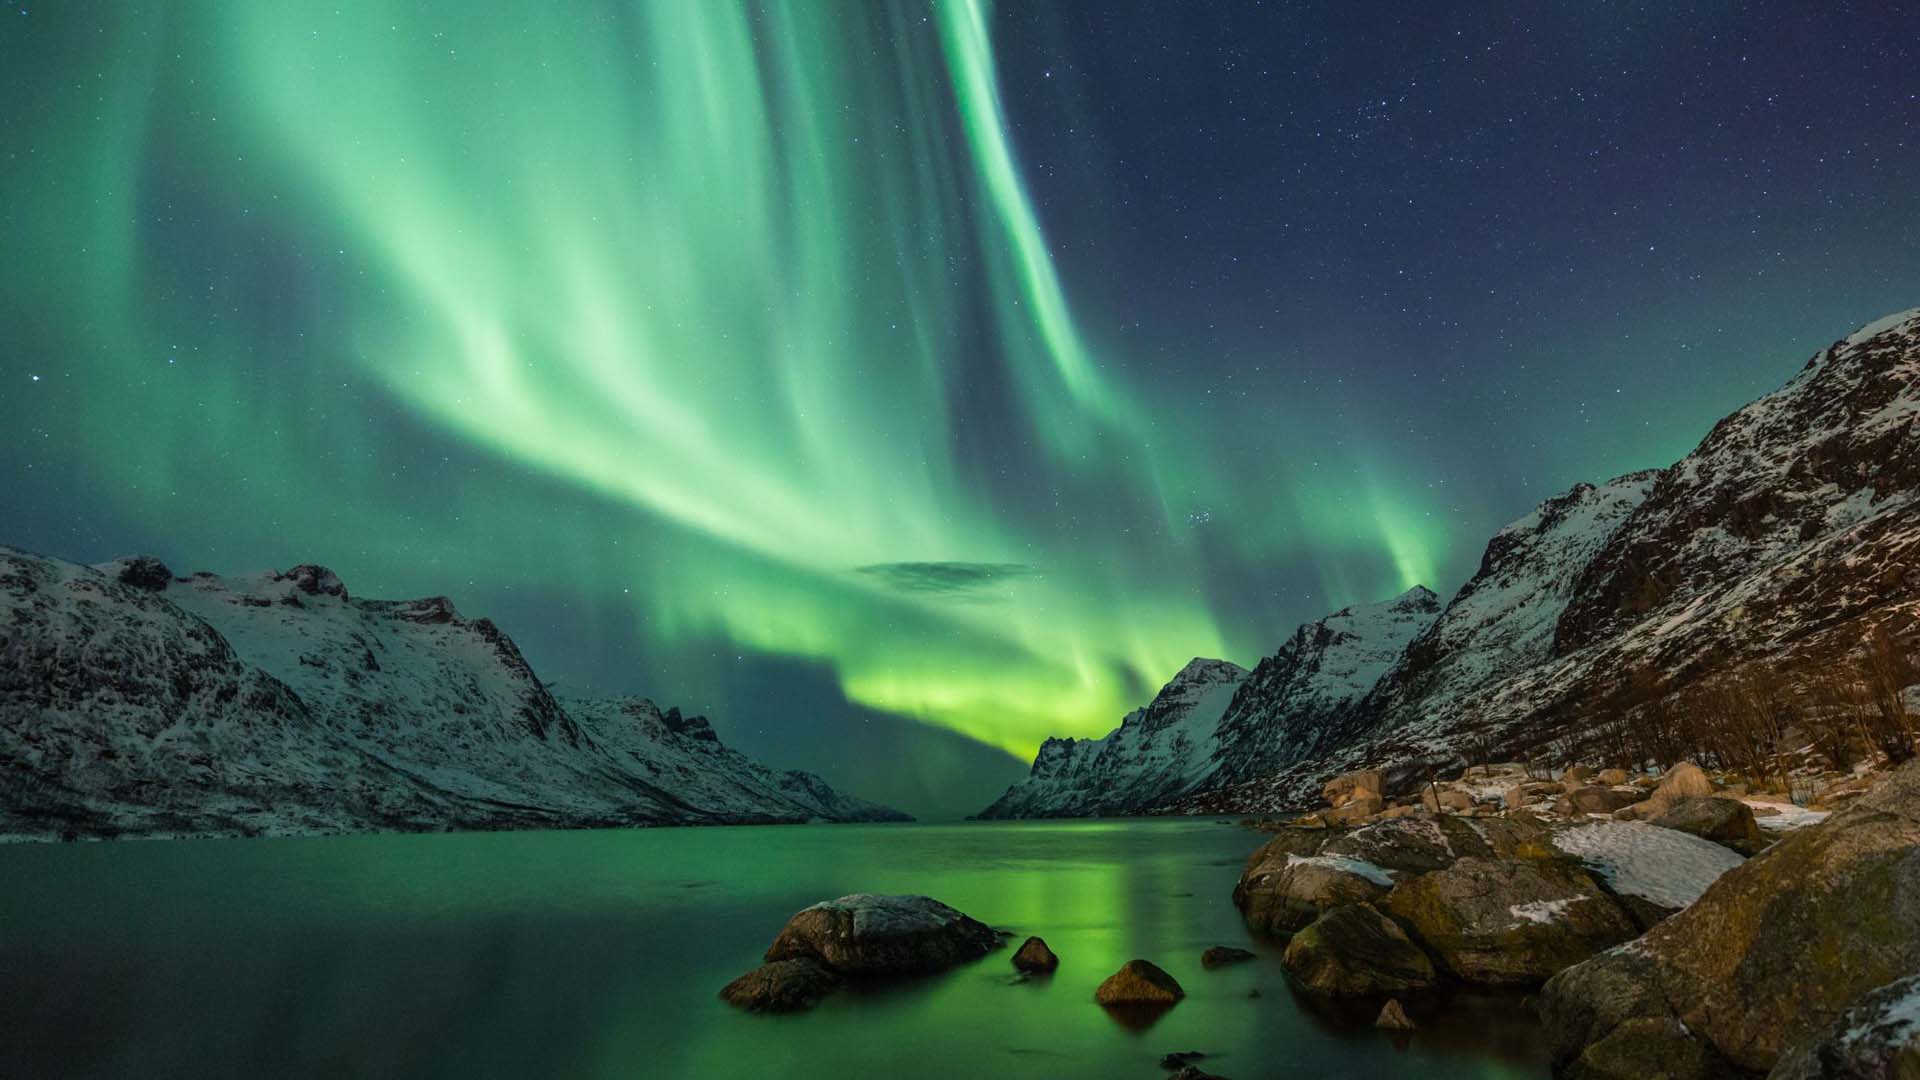 Northern Lights shine in the sky above the water's edge